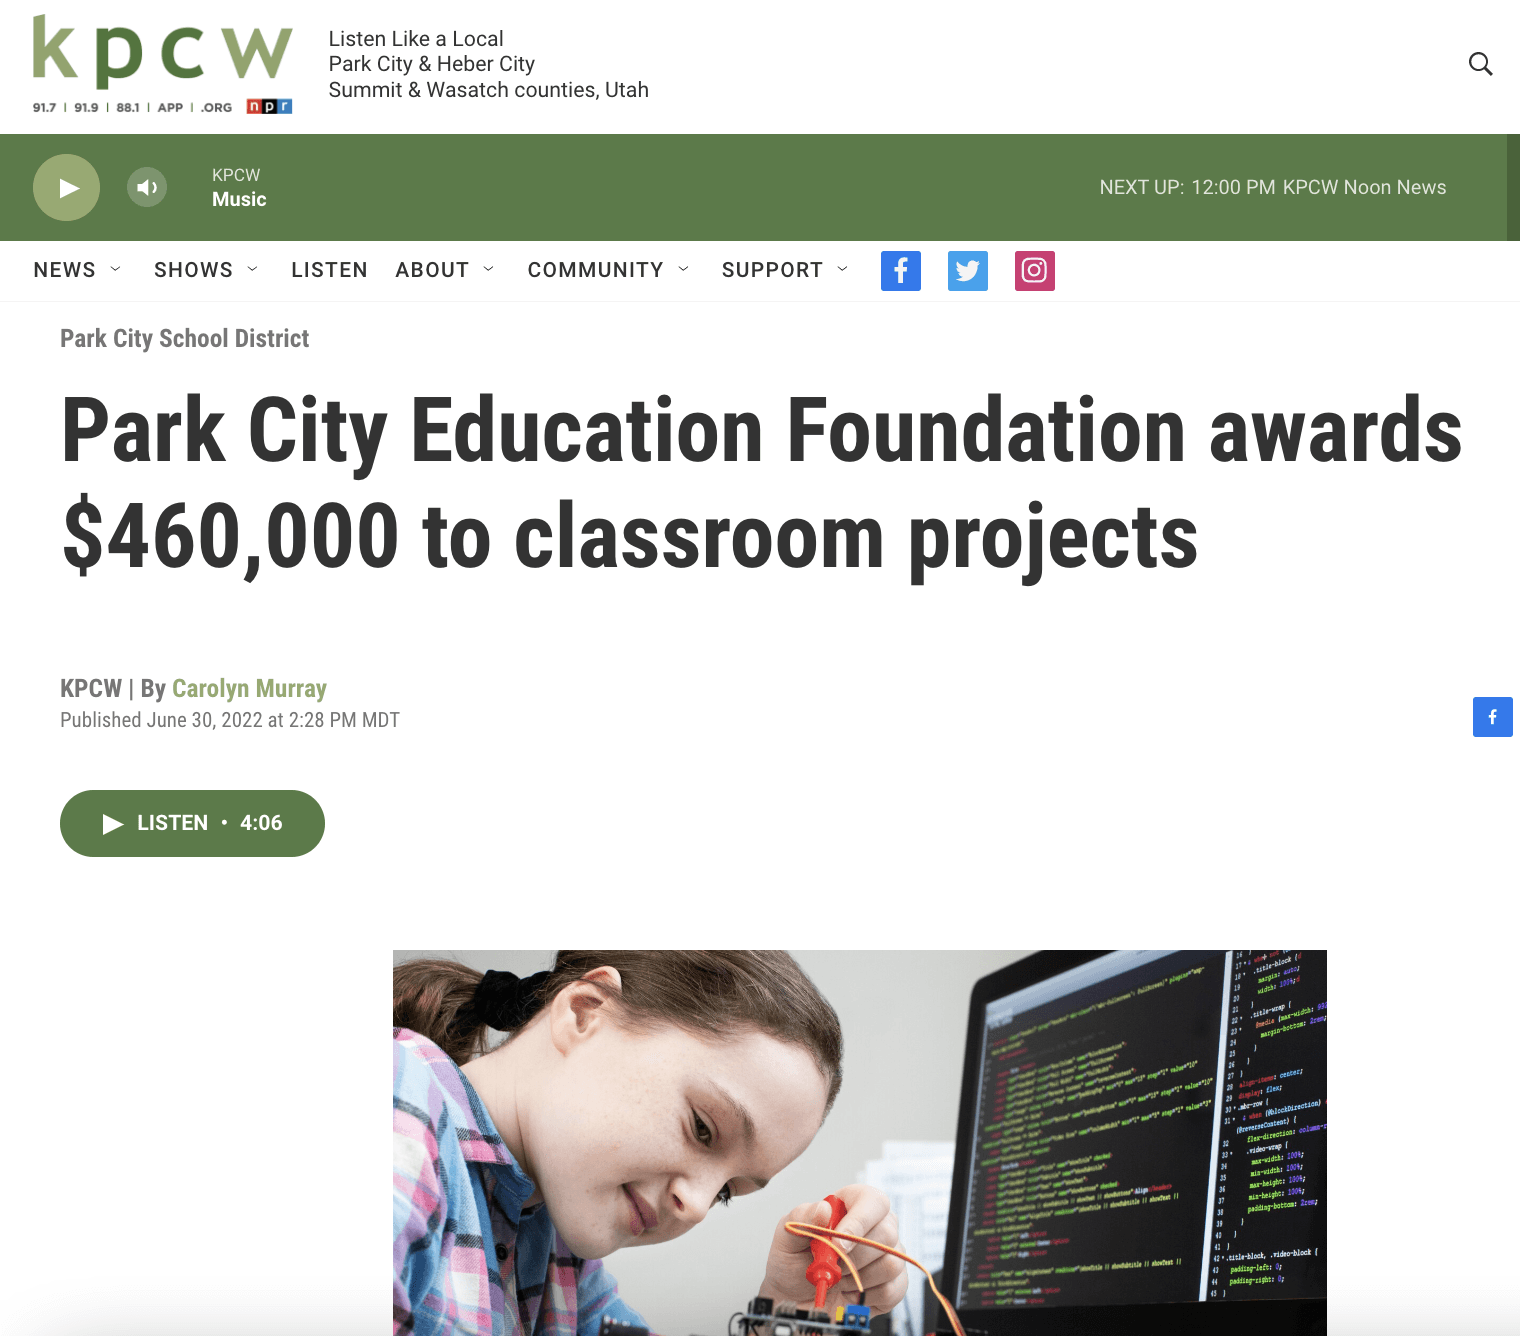 Park City Education Foundation Awards $460,000 to Classroom Projects